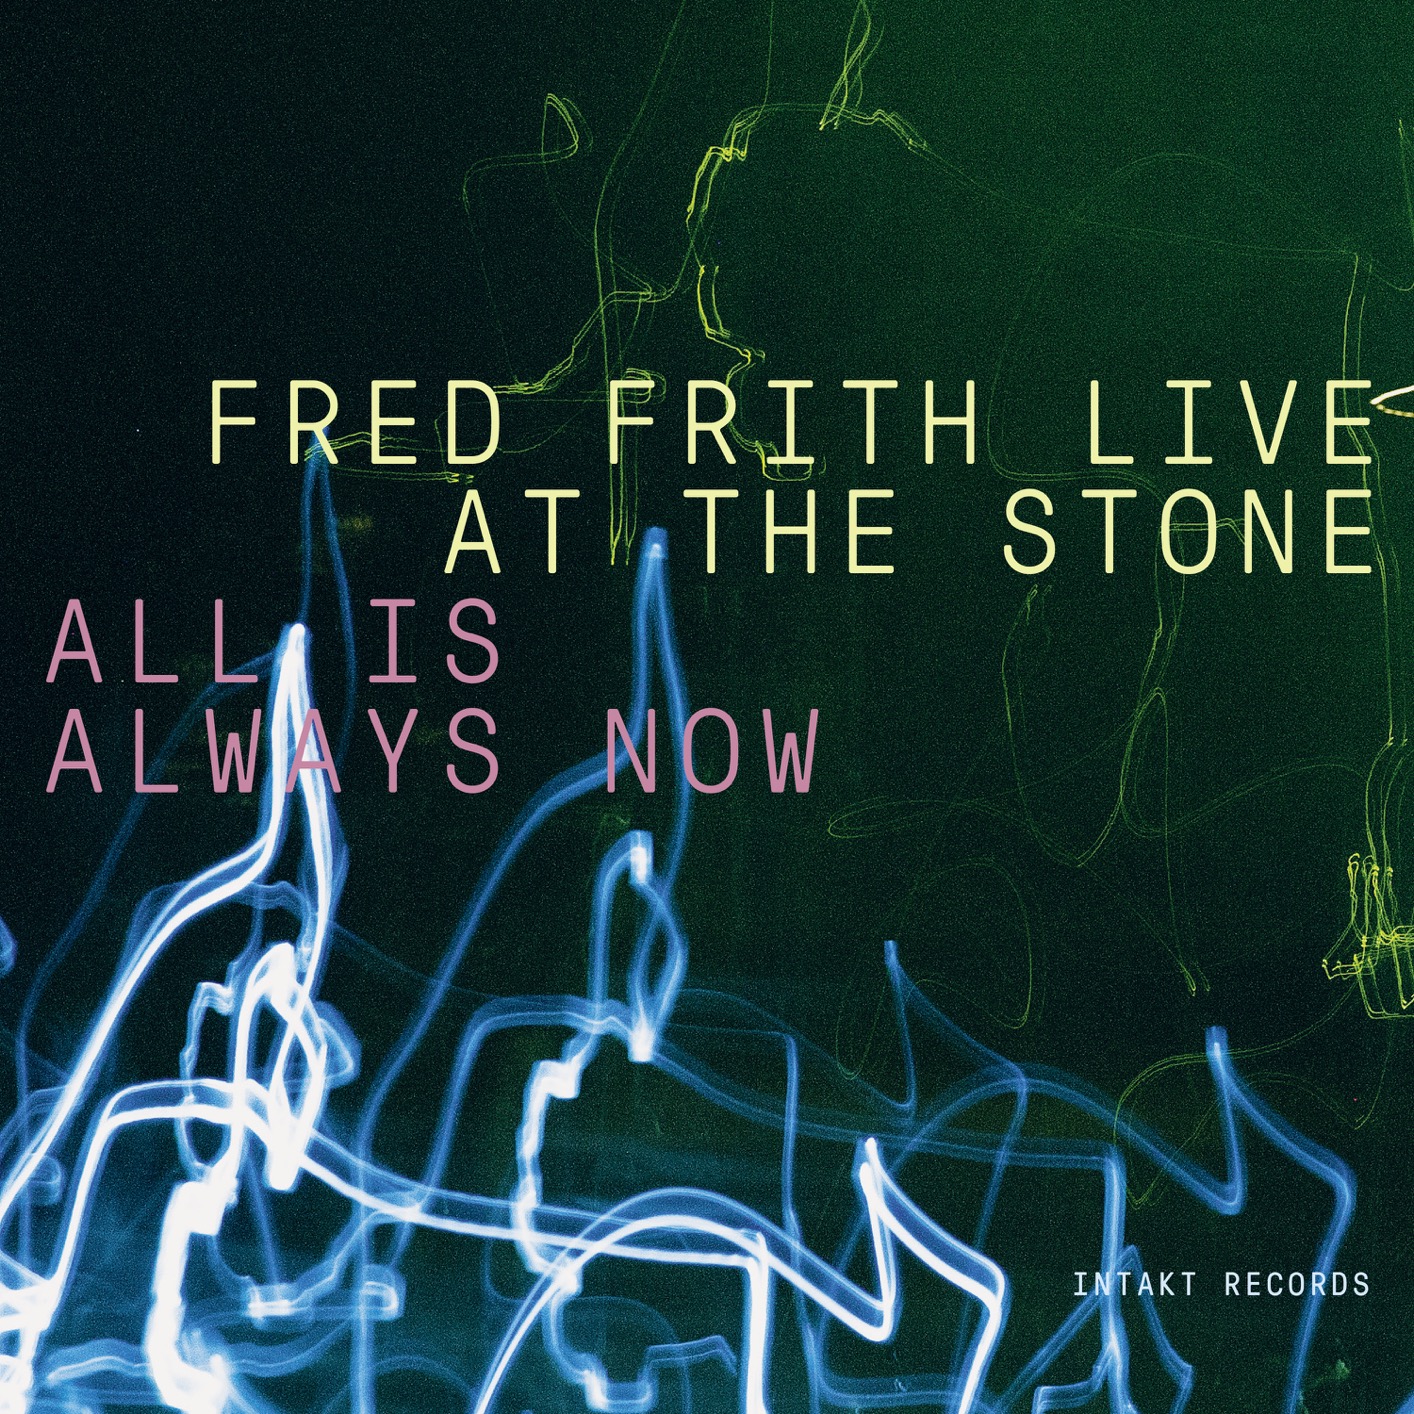 Fred Frith – All Is Always Now (Live) (2019) [FLAC 24bit/44,1kHz]